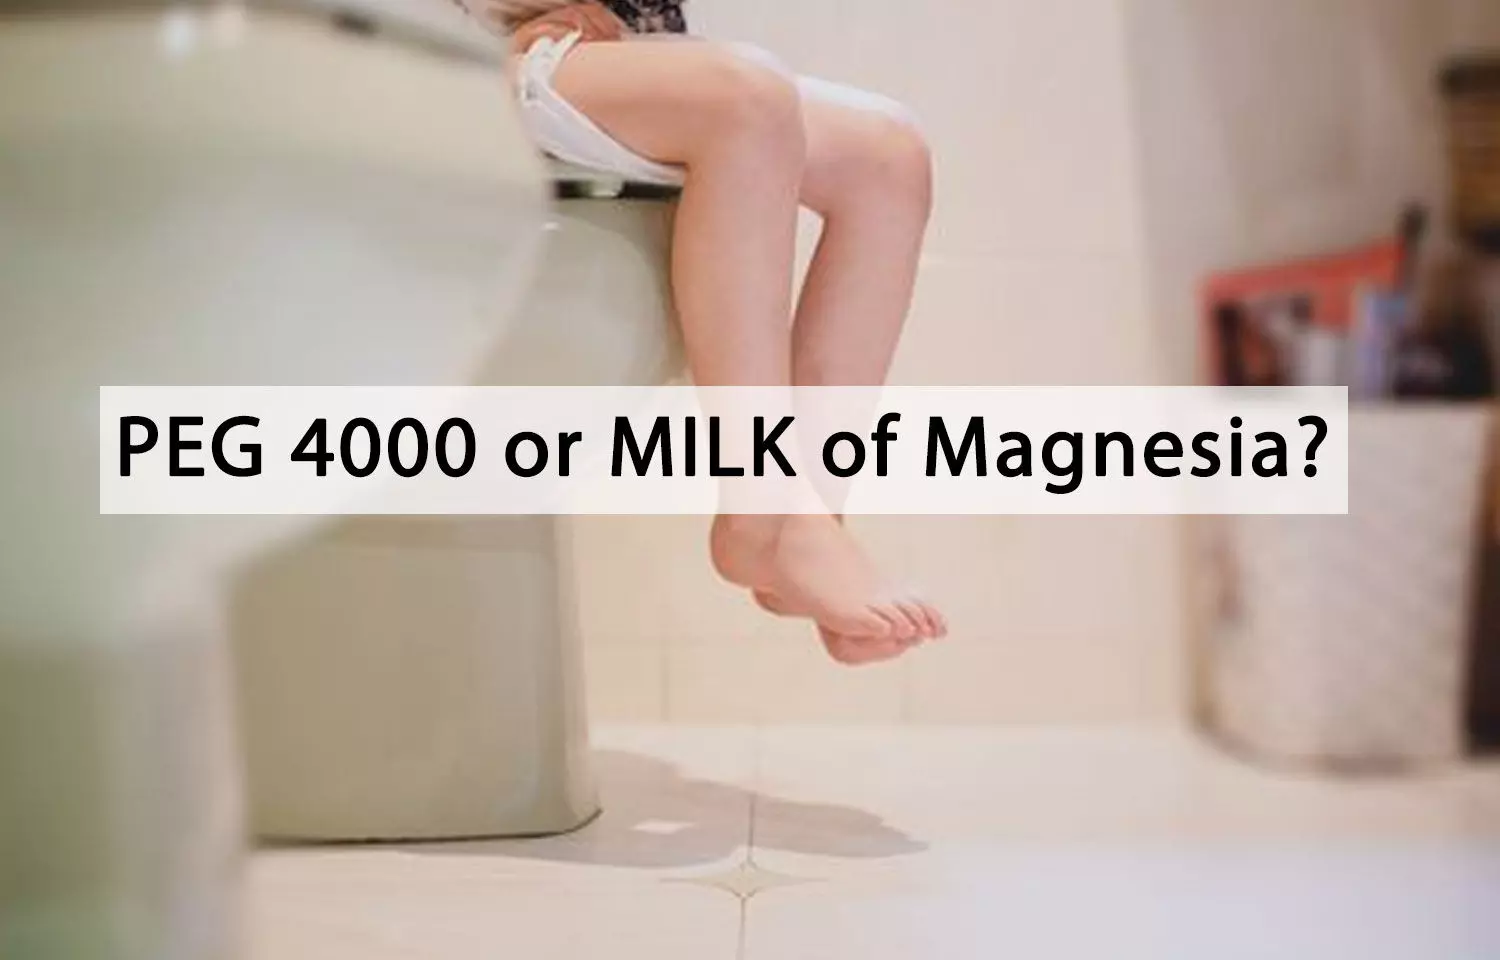 Treatment of functional constipation in infants and young children: PEG 4000 or Milk of Magnesia?